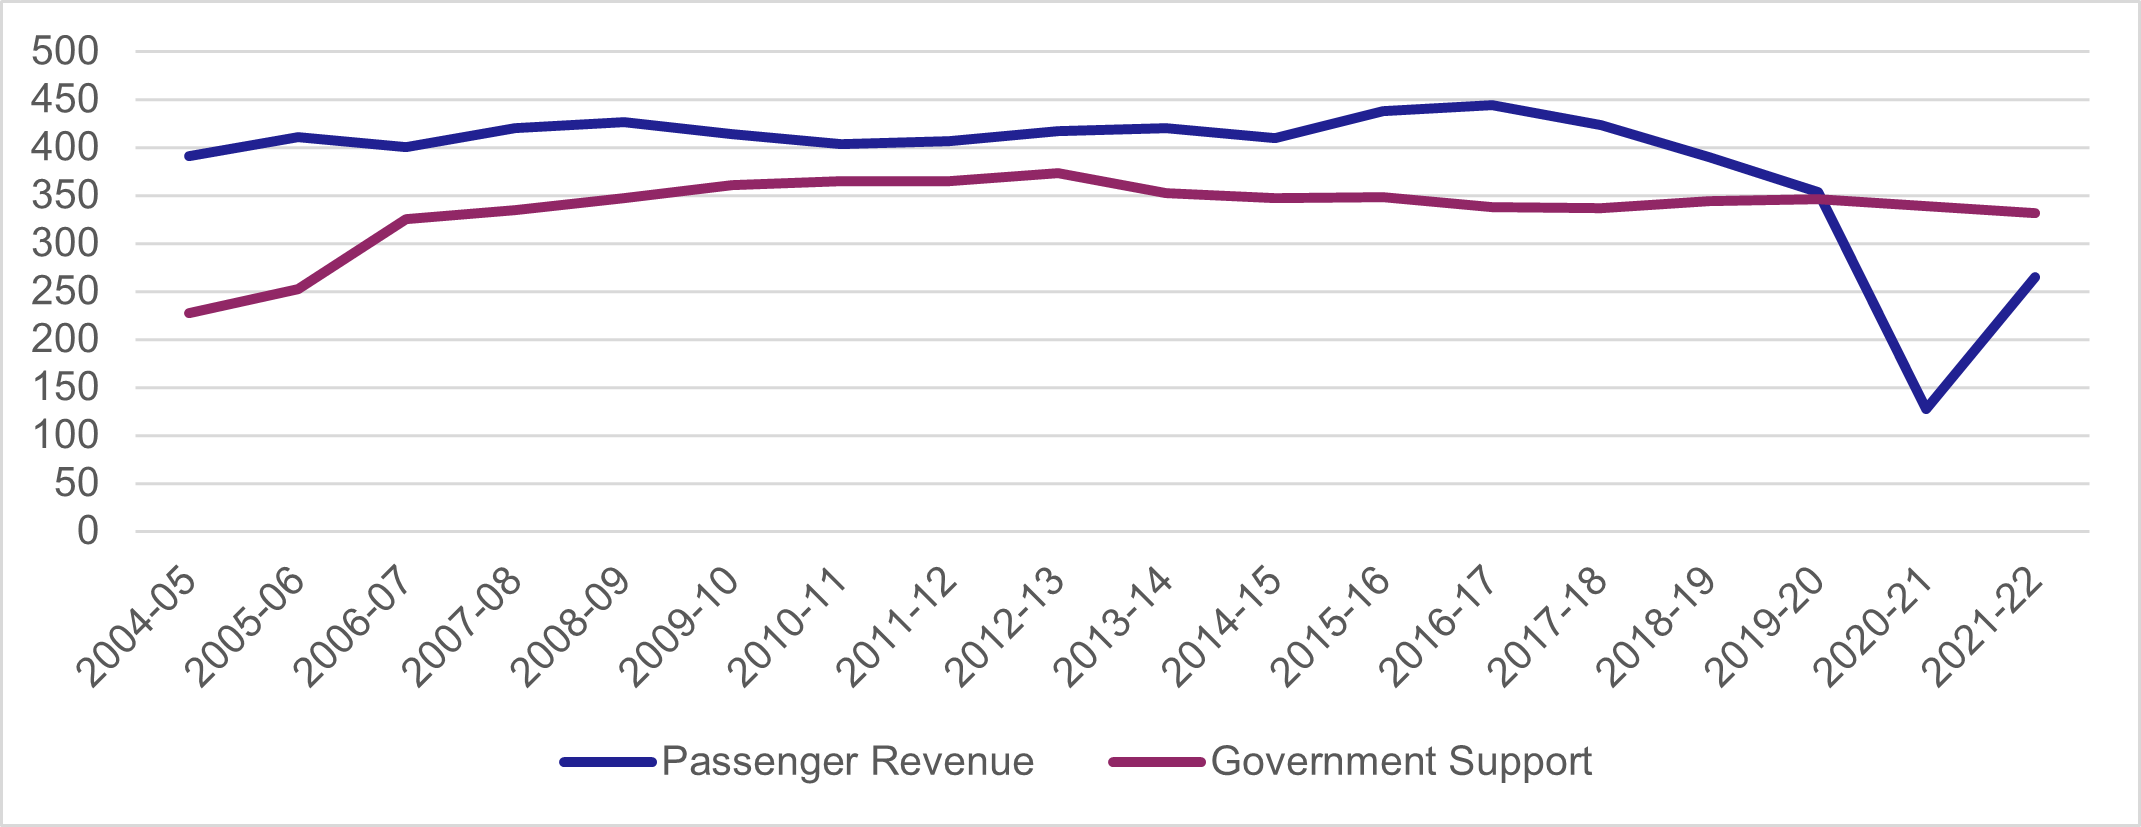 Figure 11 - Local Bus Service Passenger Revenue vs Government Support - Constant (2021) prices - 2004-05 to 2021-22, as described in text below